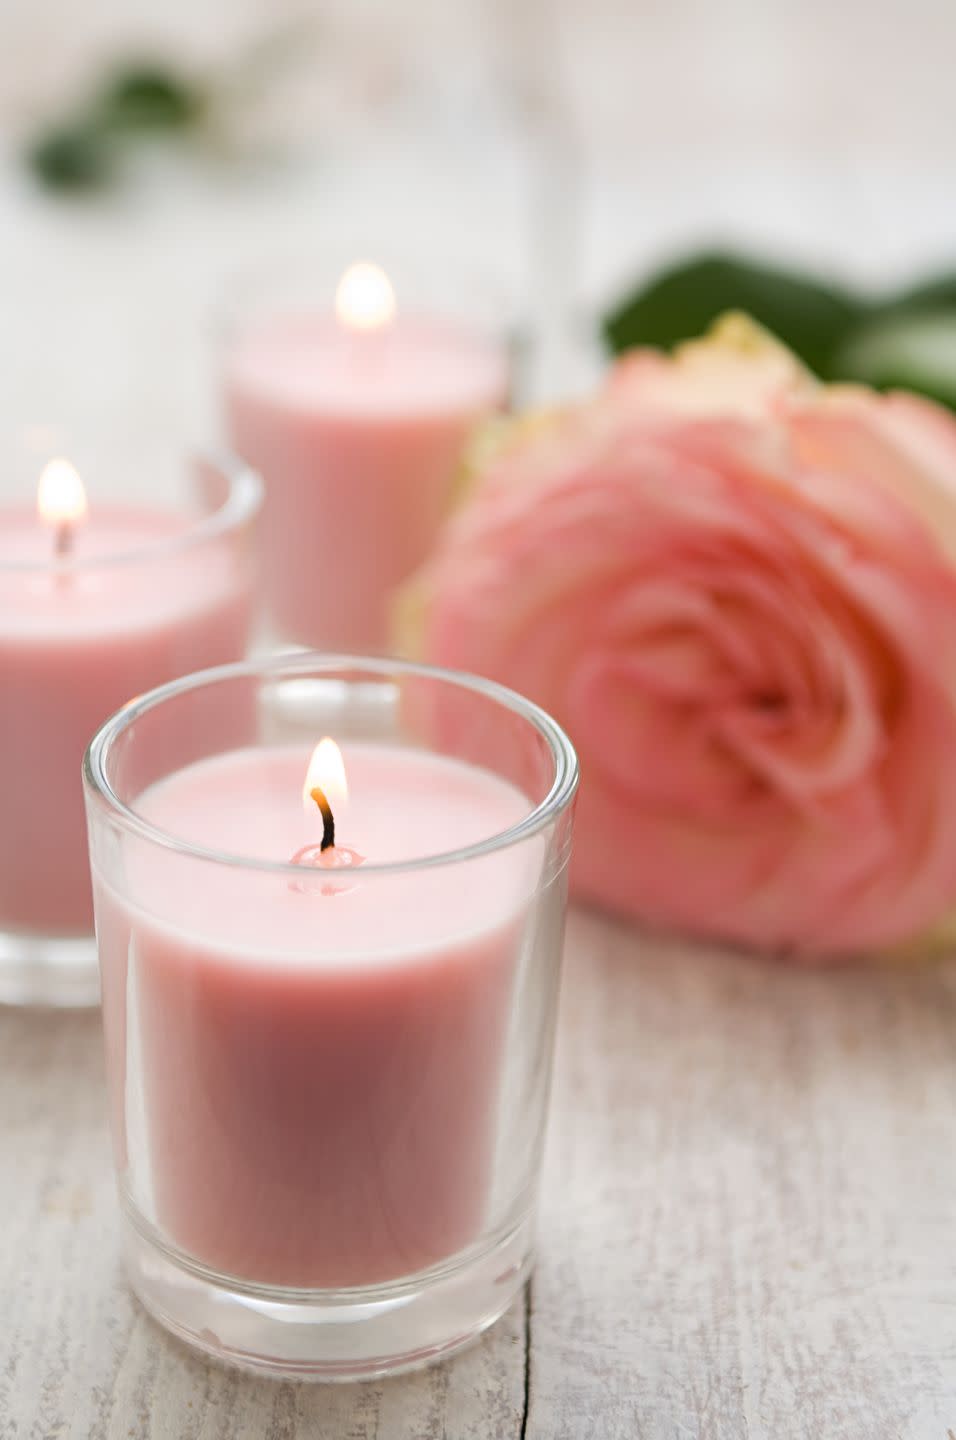 Make your home more fragrant.